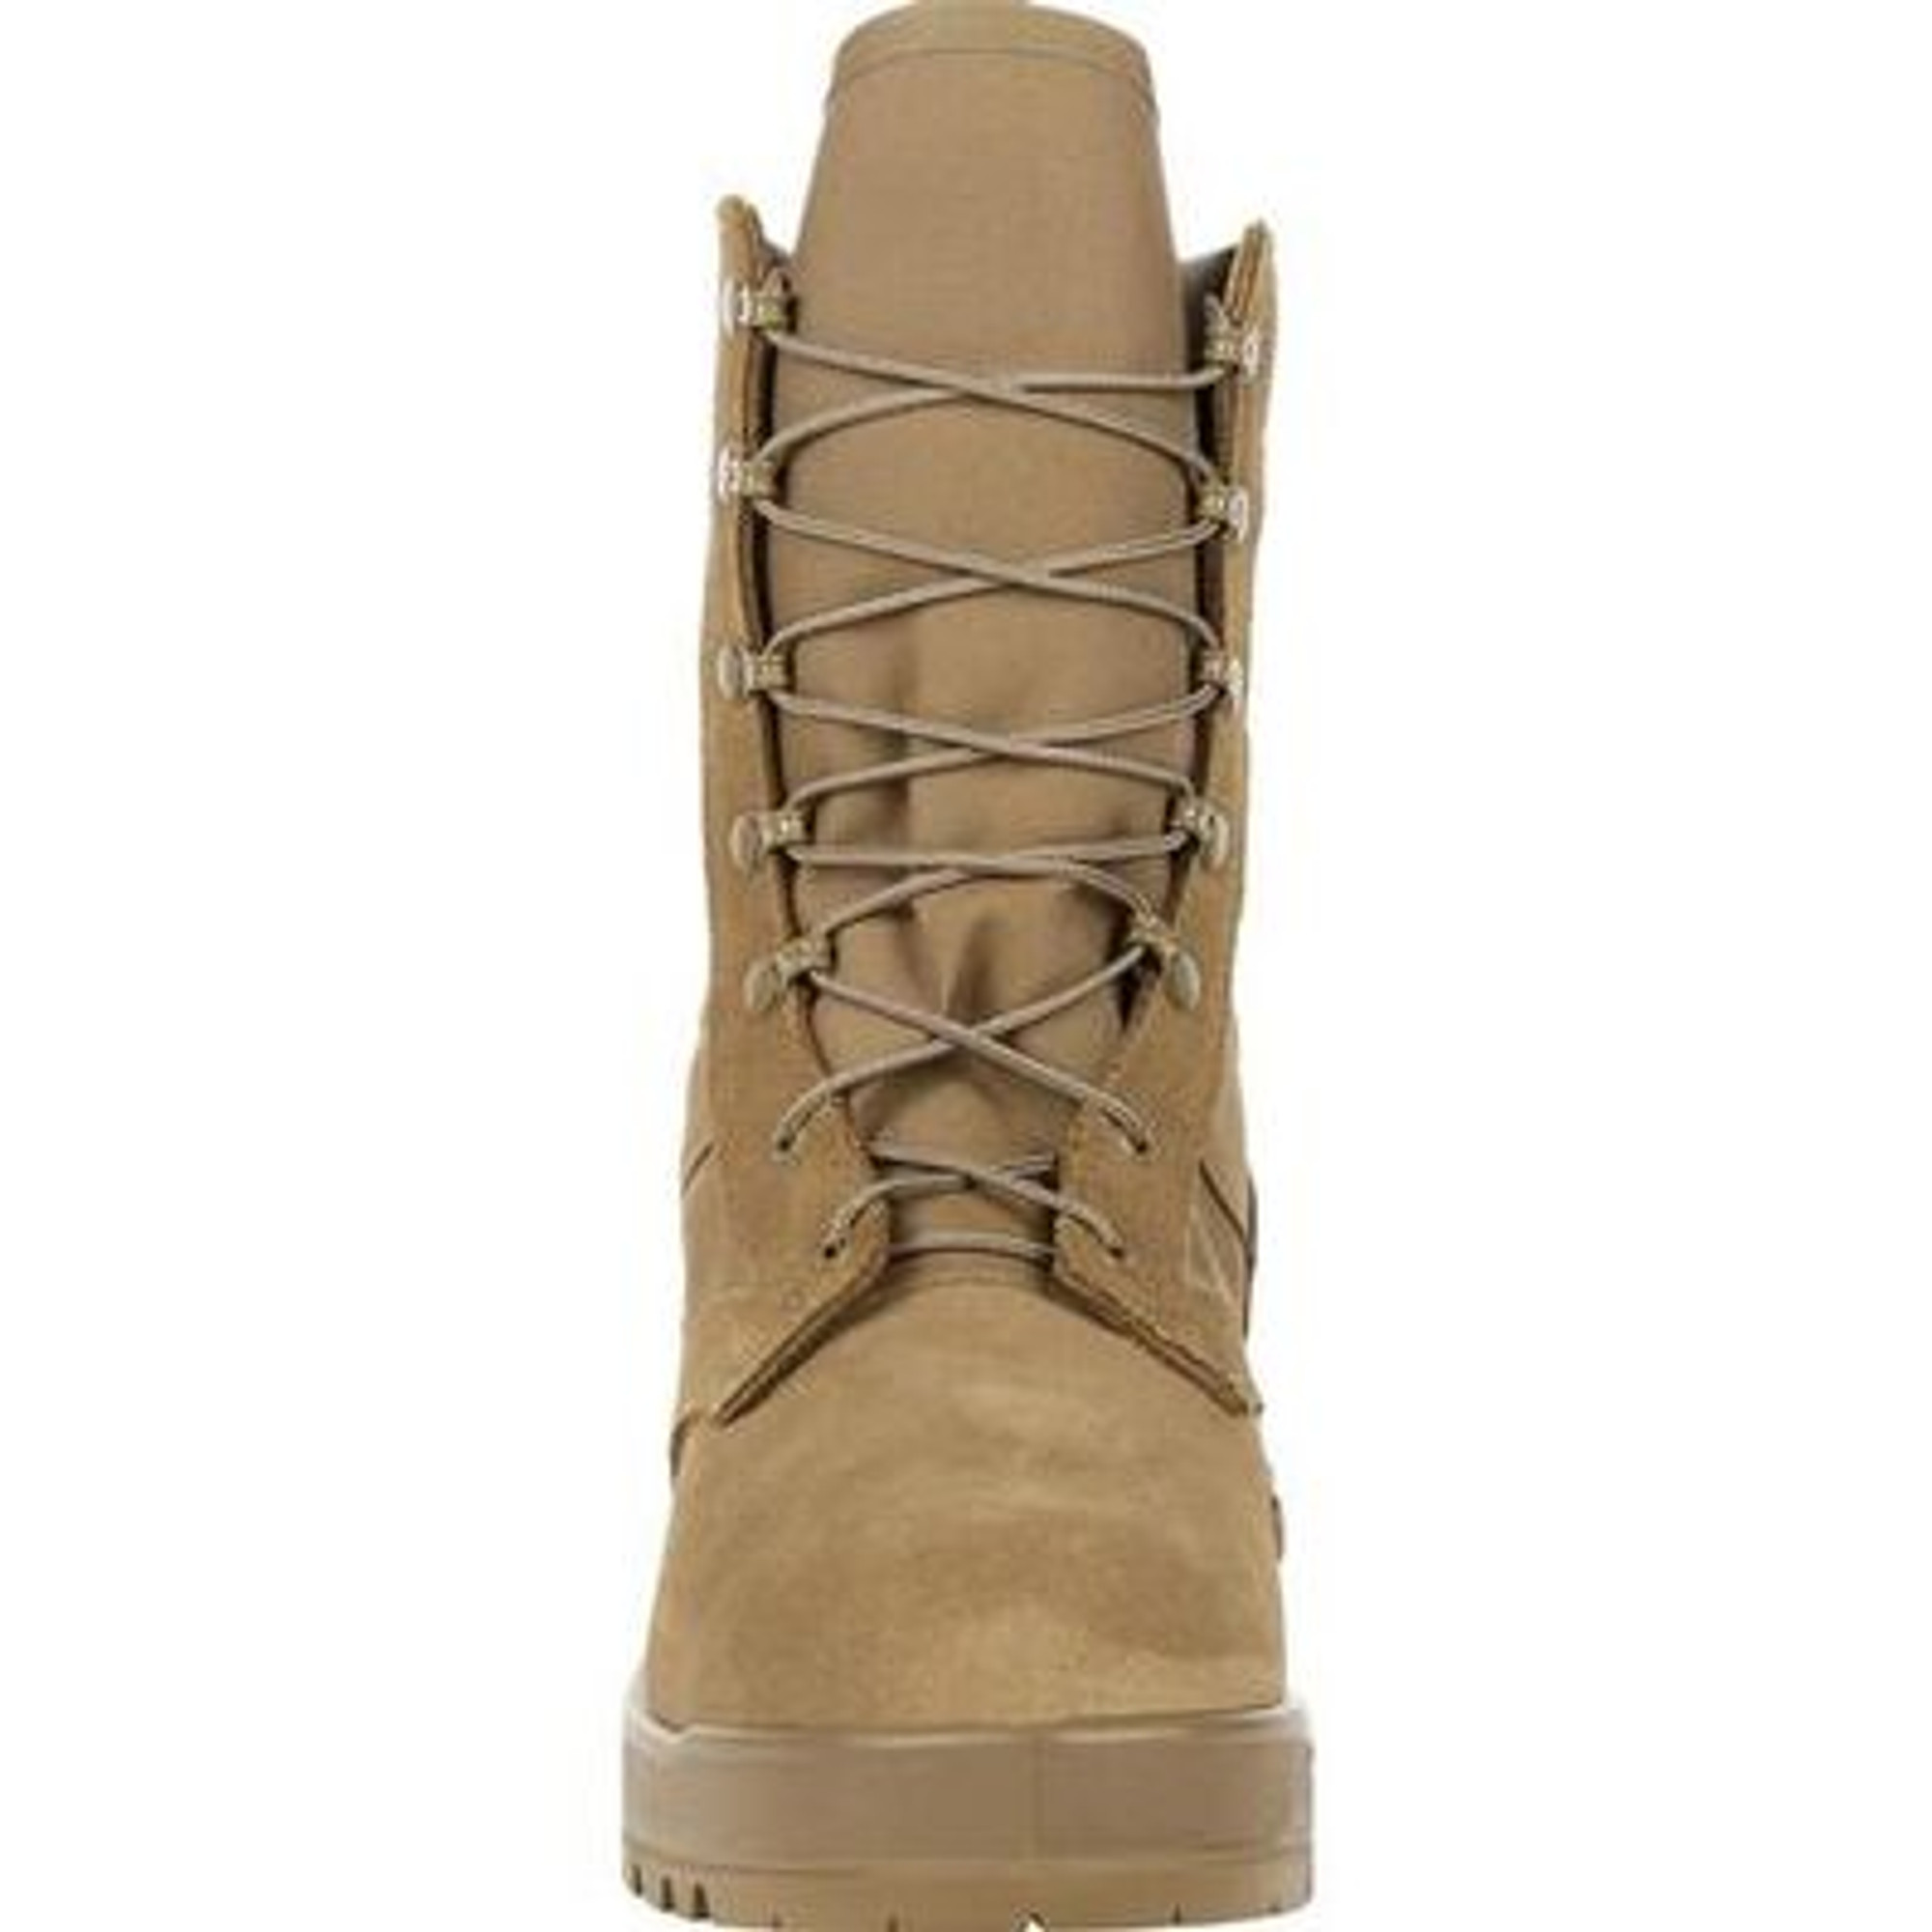 Rocky Entry Level Hot Weather Military Boot - Coyote Brown